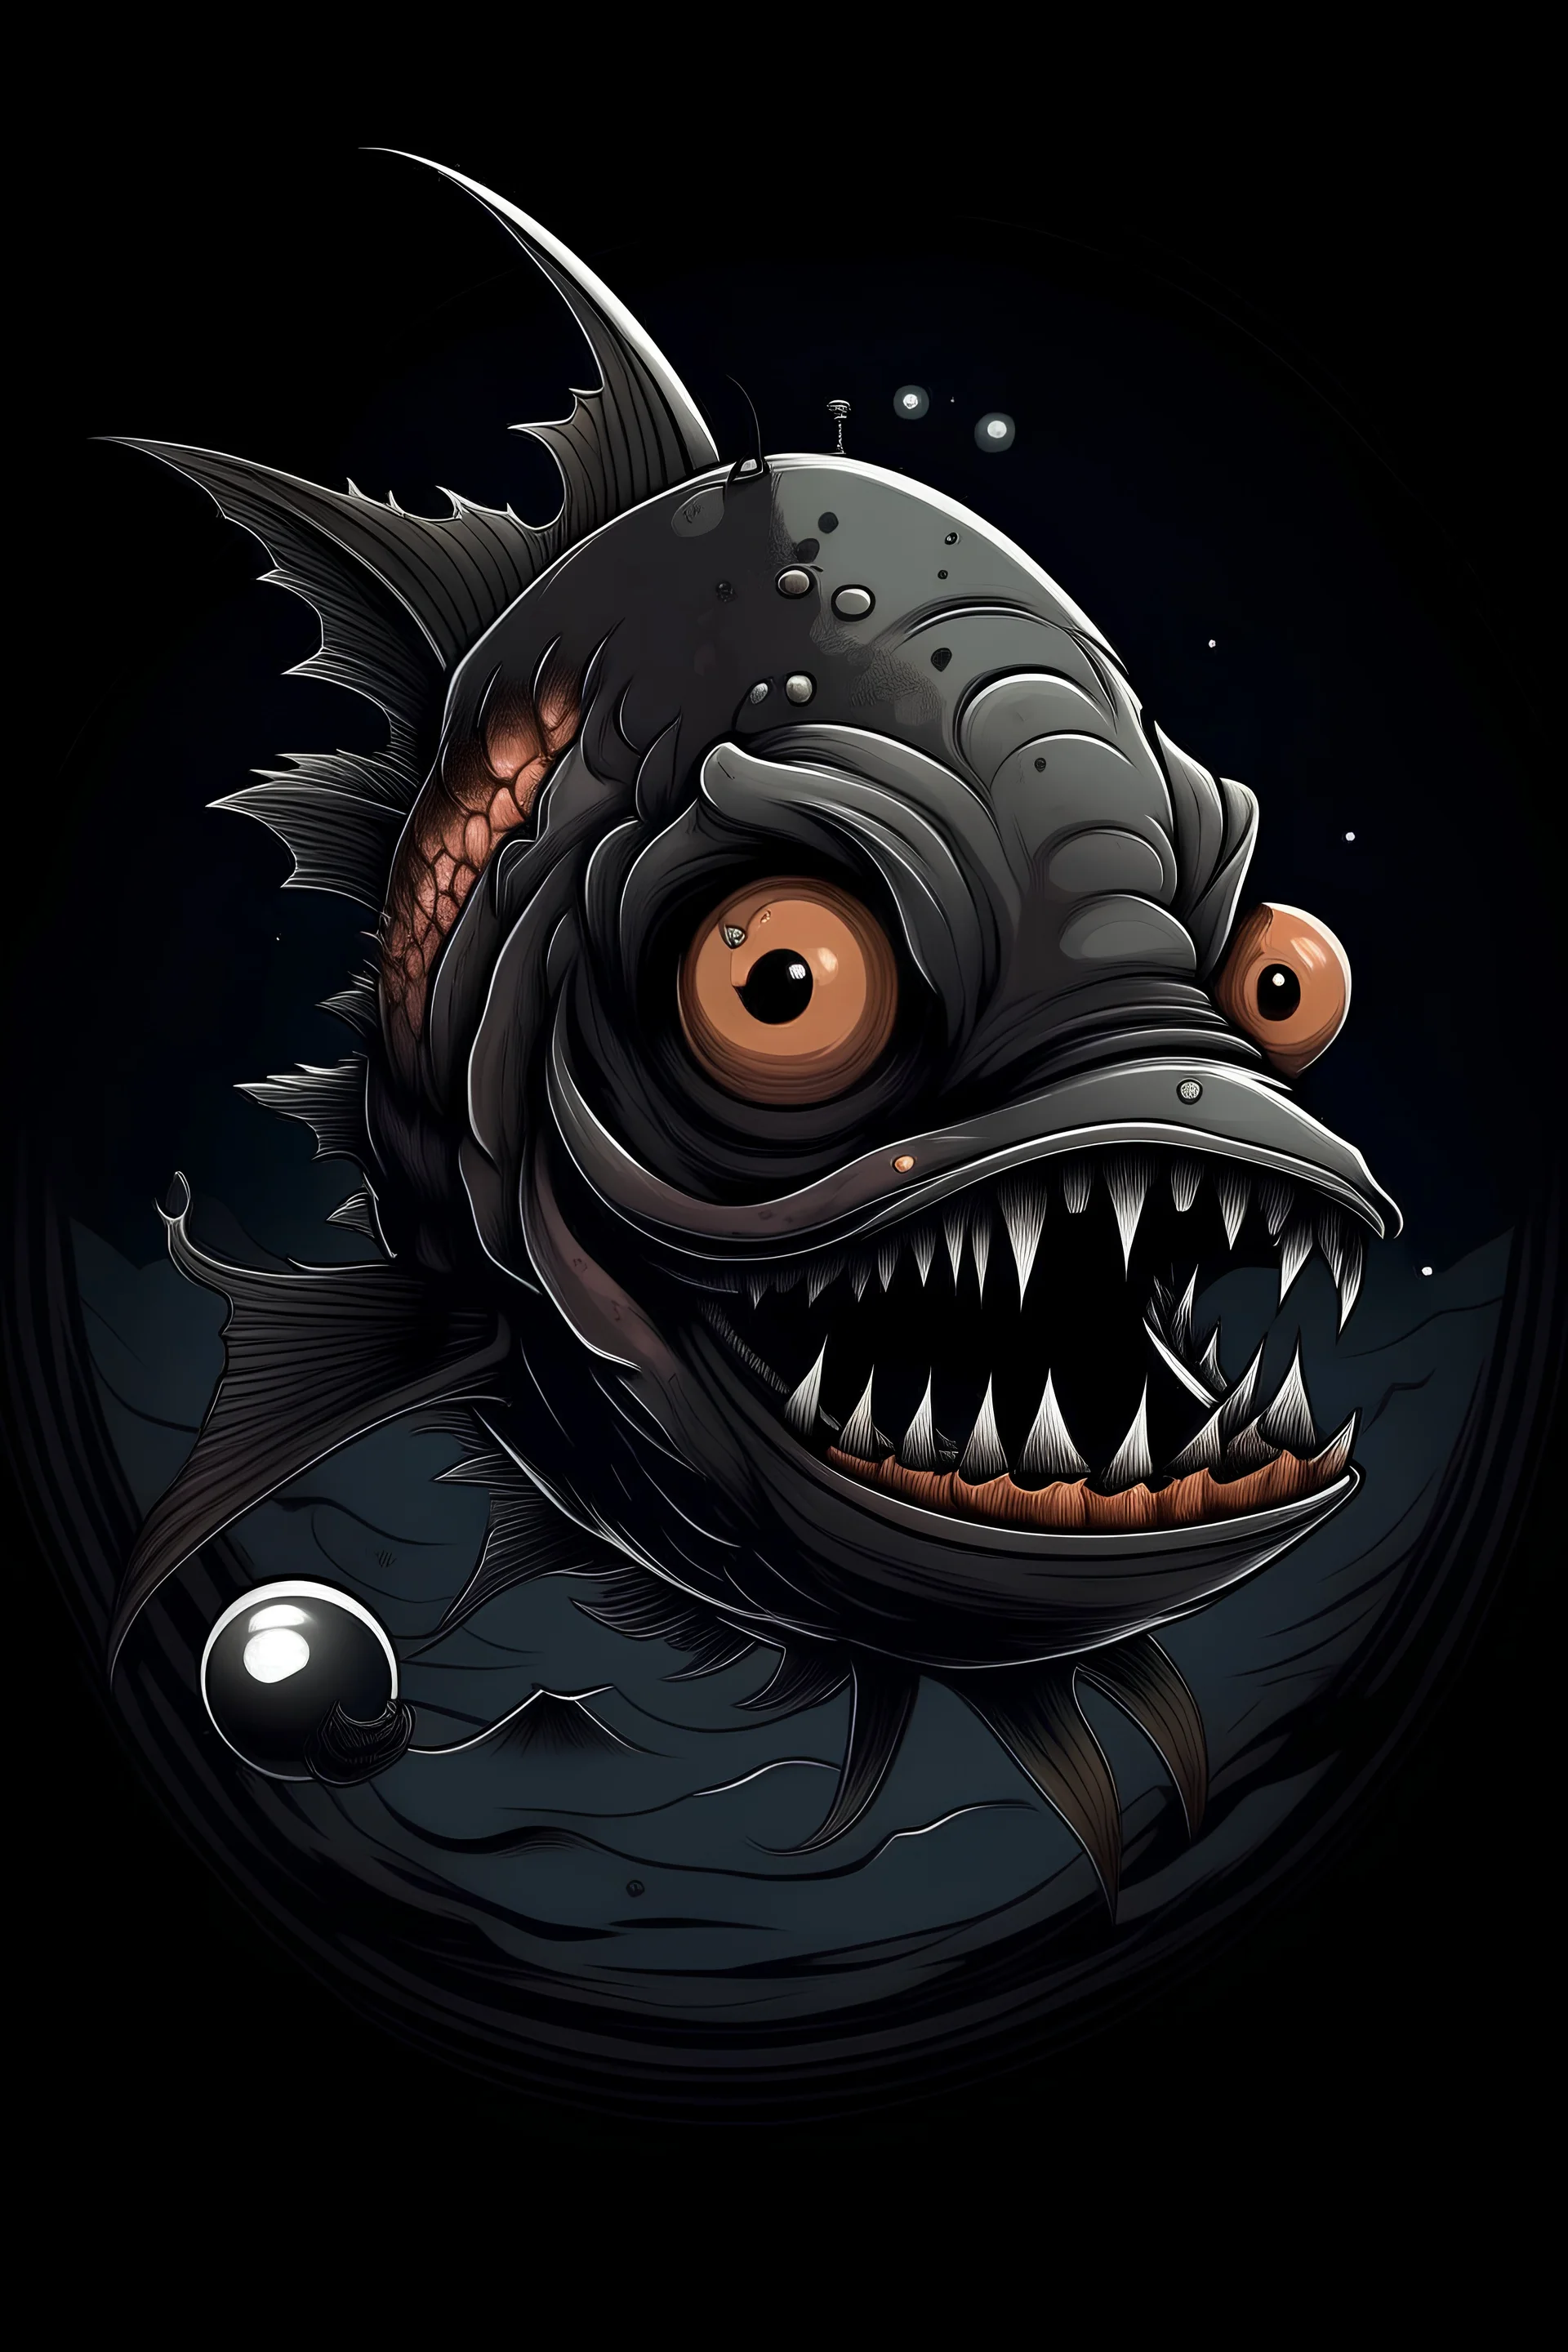 angler fish with crescent moon looking e, Gallery